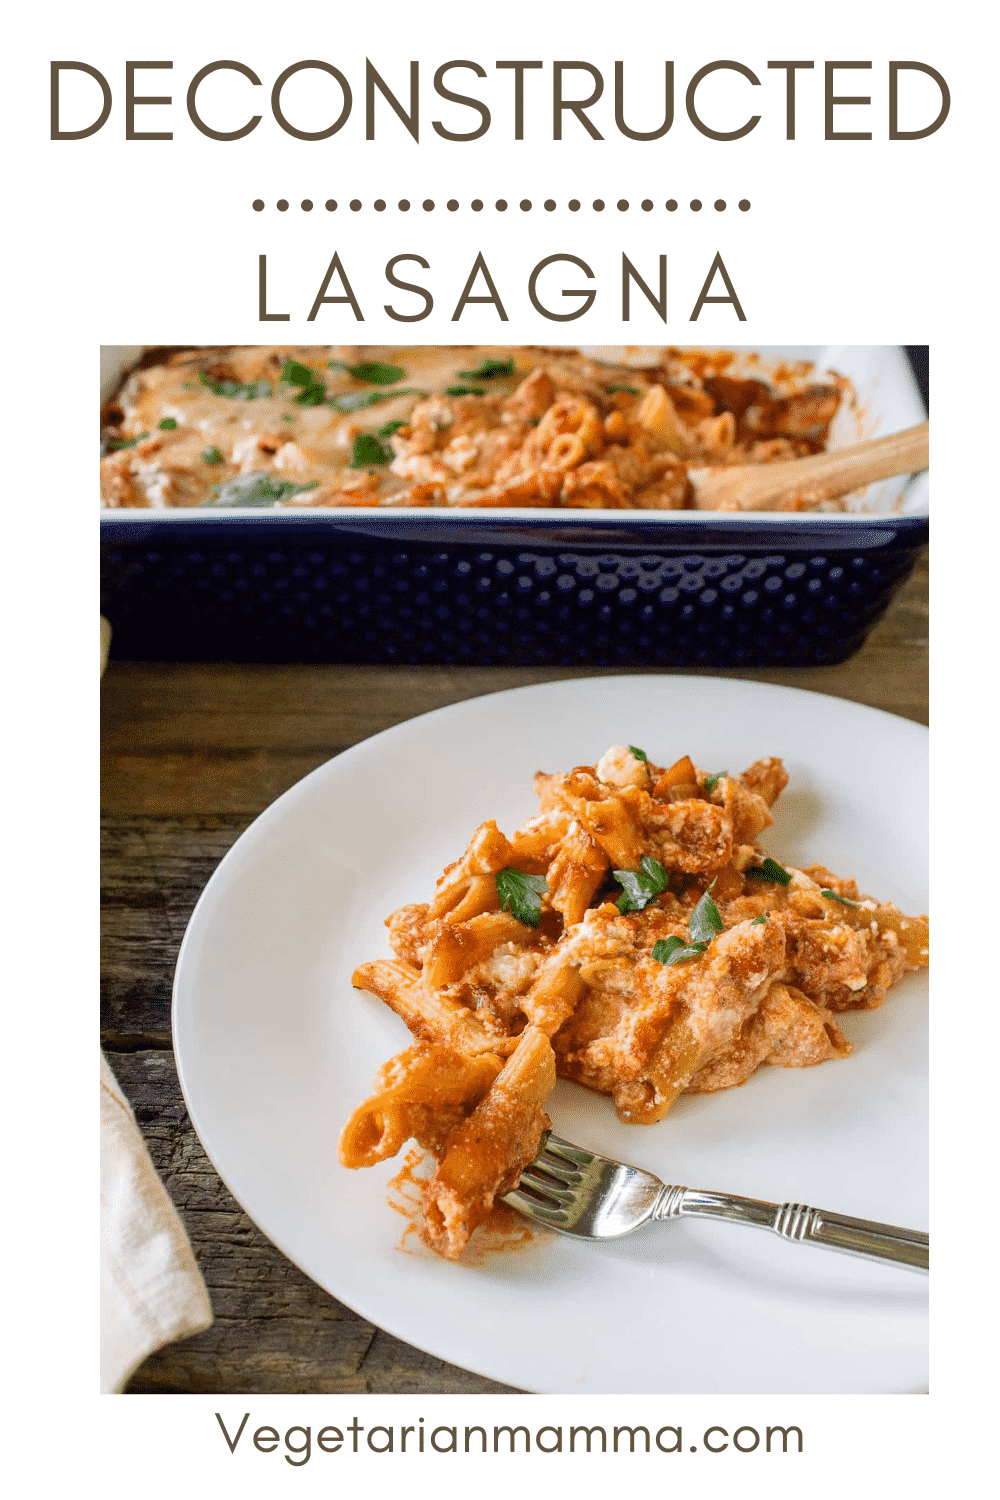 Deconstructed Lasagna is our version of the ultimate comfort food dinner. Tender noodles enveloped in flavorful sauce and topped with cheese. #deconstructedlasagna #vegetarianlasagna #lasagnarecipe